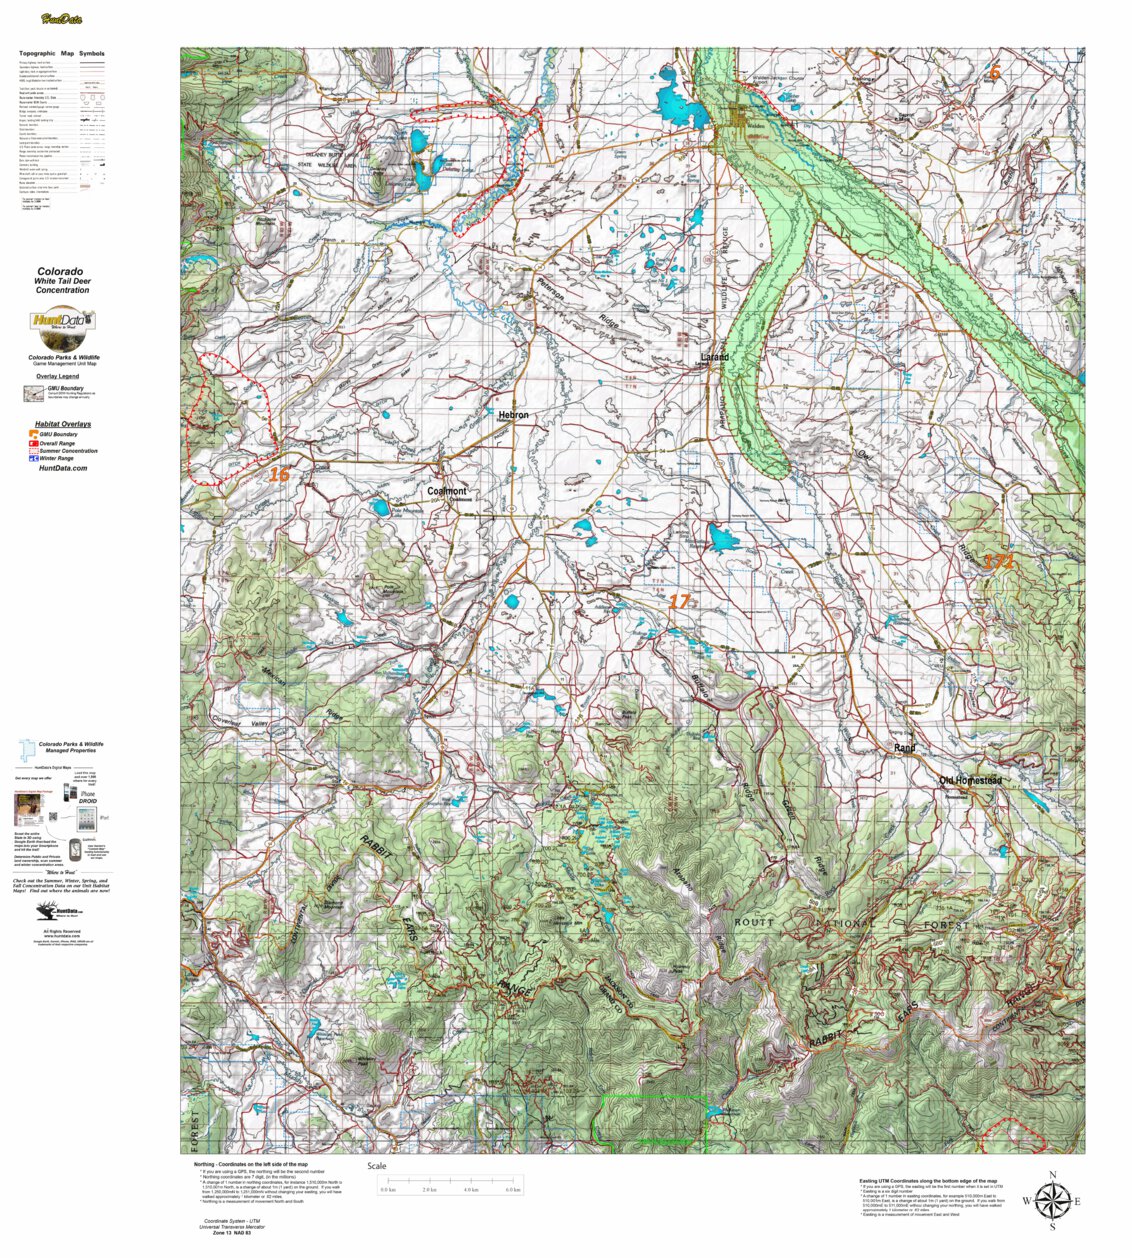 CO_17_White_Tail_Deer_Habitat Map by Colorado HuntData LLC | Avenza Maps